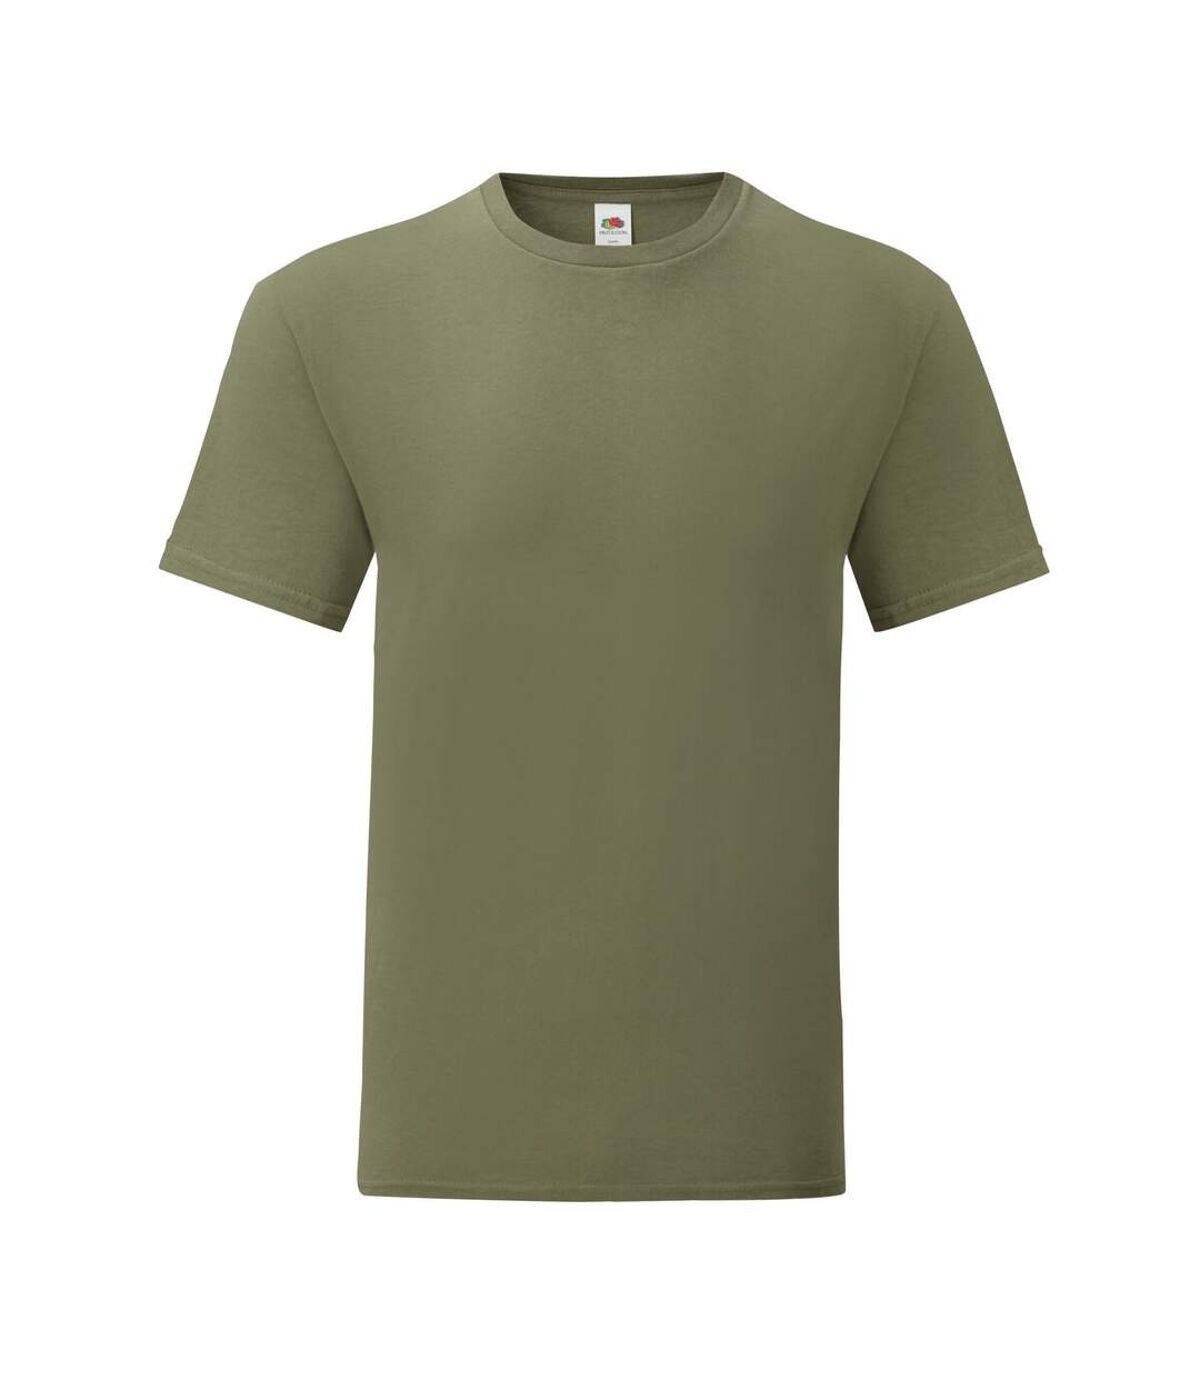 Fruit of the Loom Mens Iconic Premium Ringspun Cotton T-Shirt (Classic Olive)